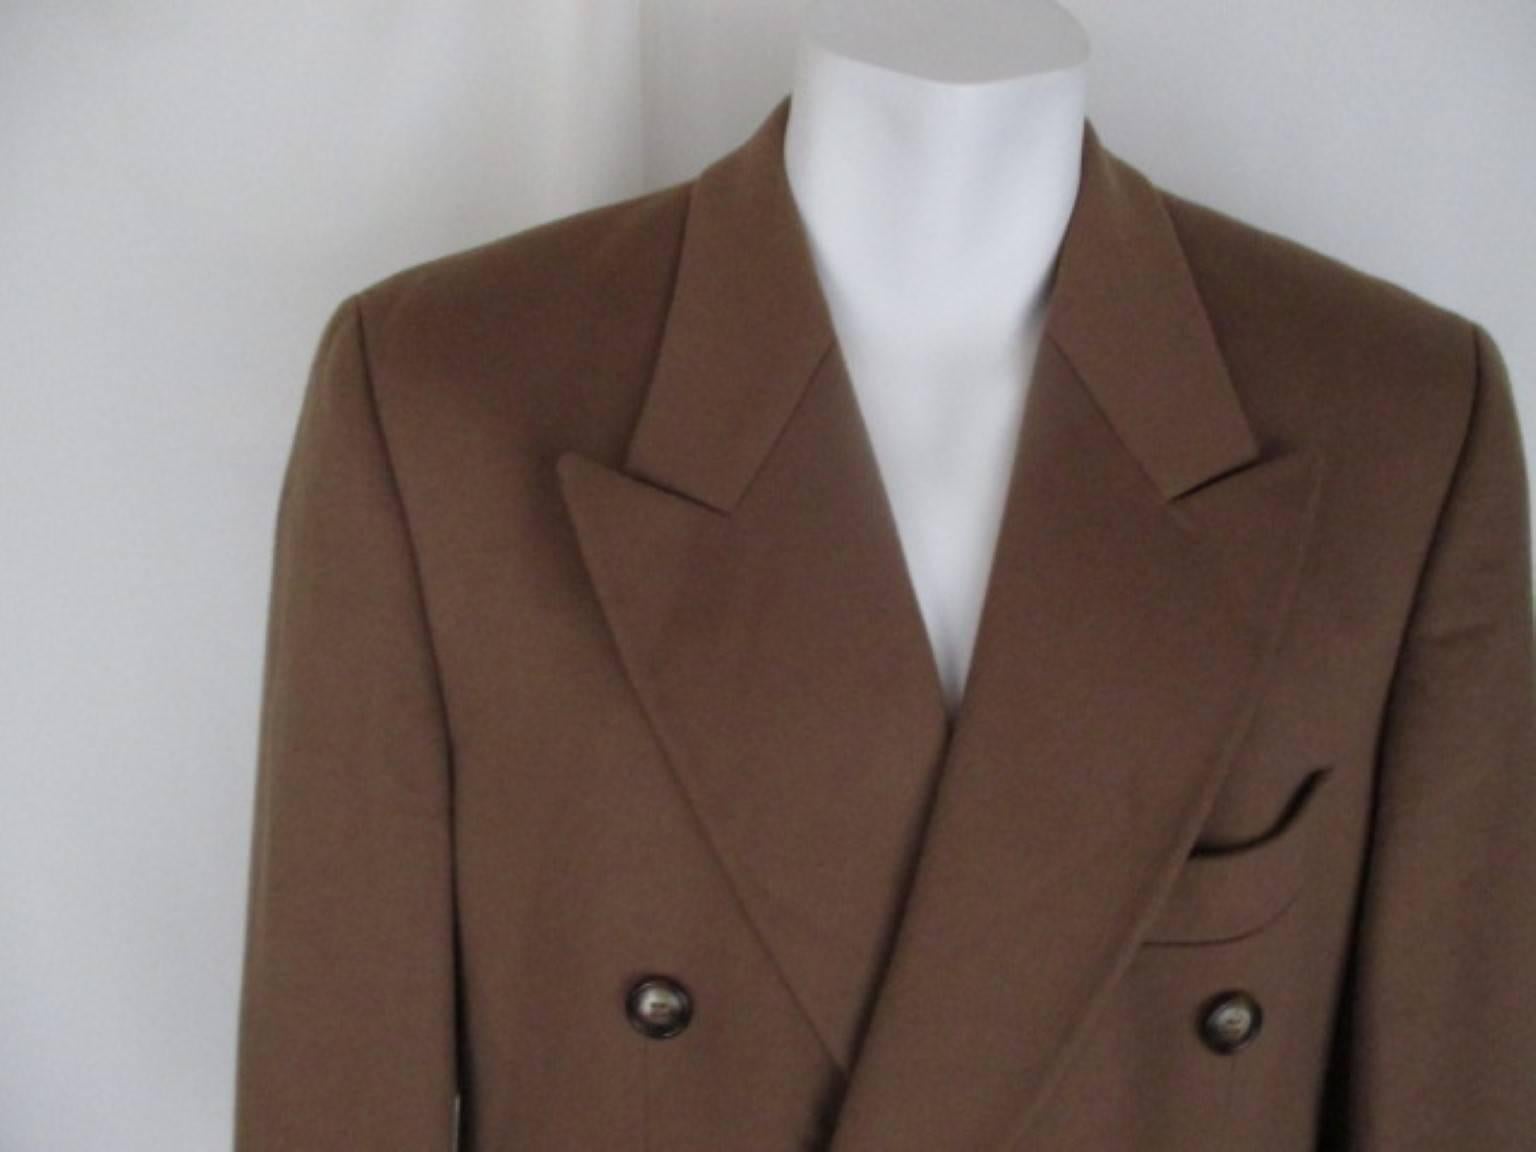 This double brested coat has 2 pockets, 2 inside pockets and is made of 90% wool and 10% cashmere.
Size is marked EU 48
Please note that vintage items are not new and therefore might have minor imperfections. 